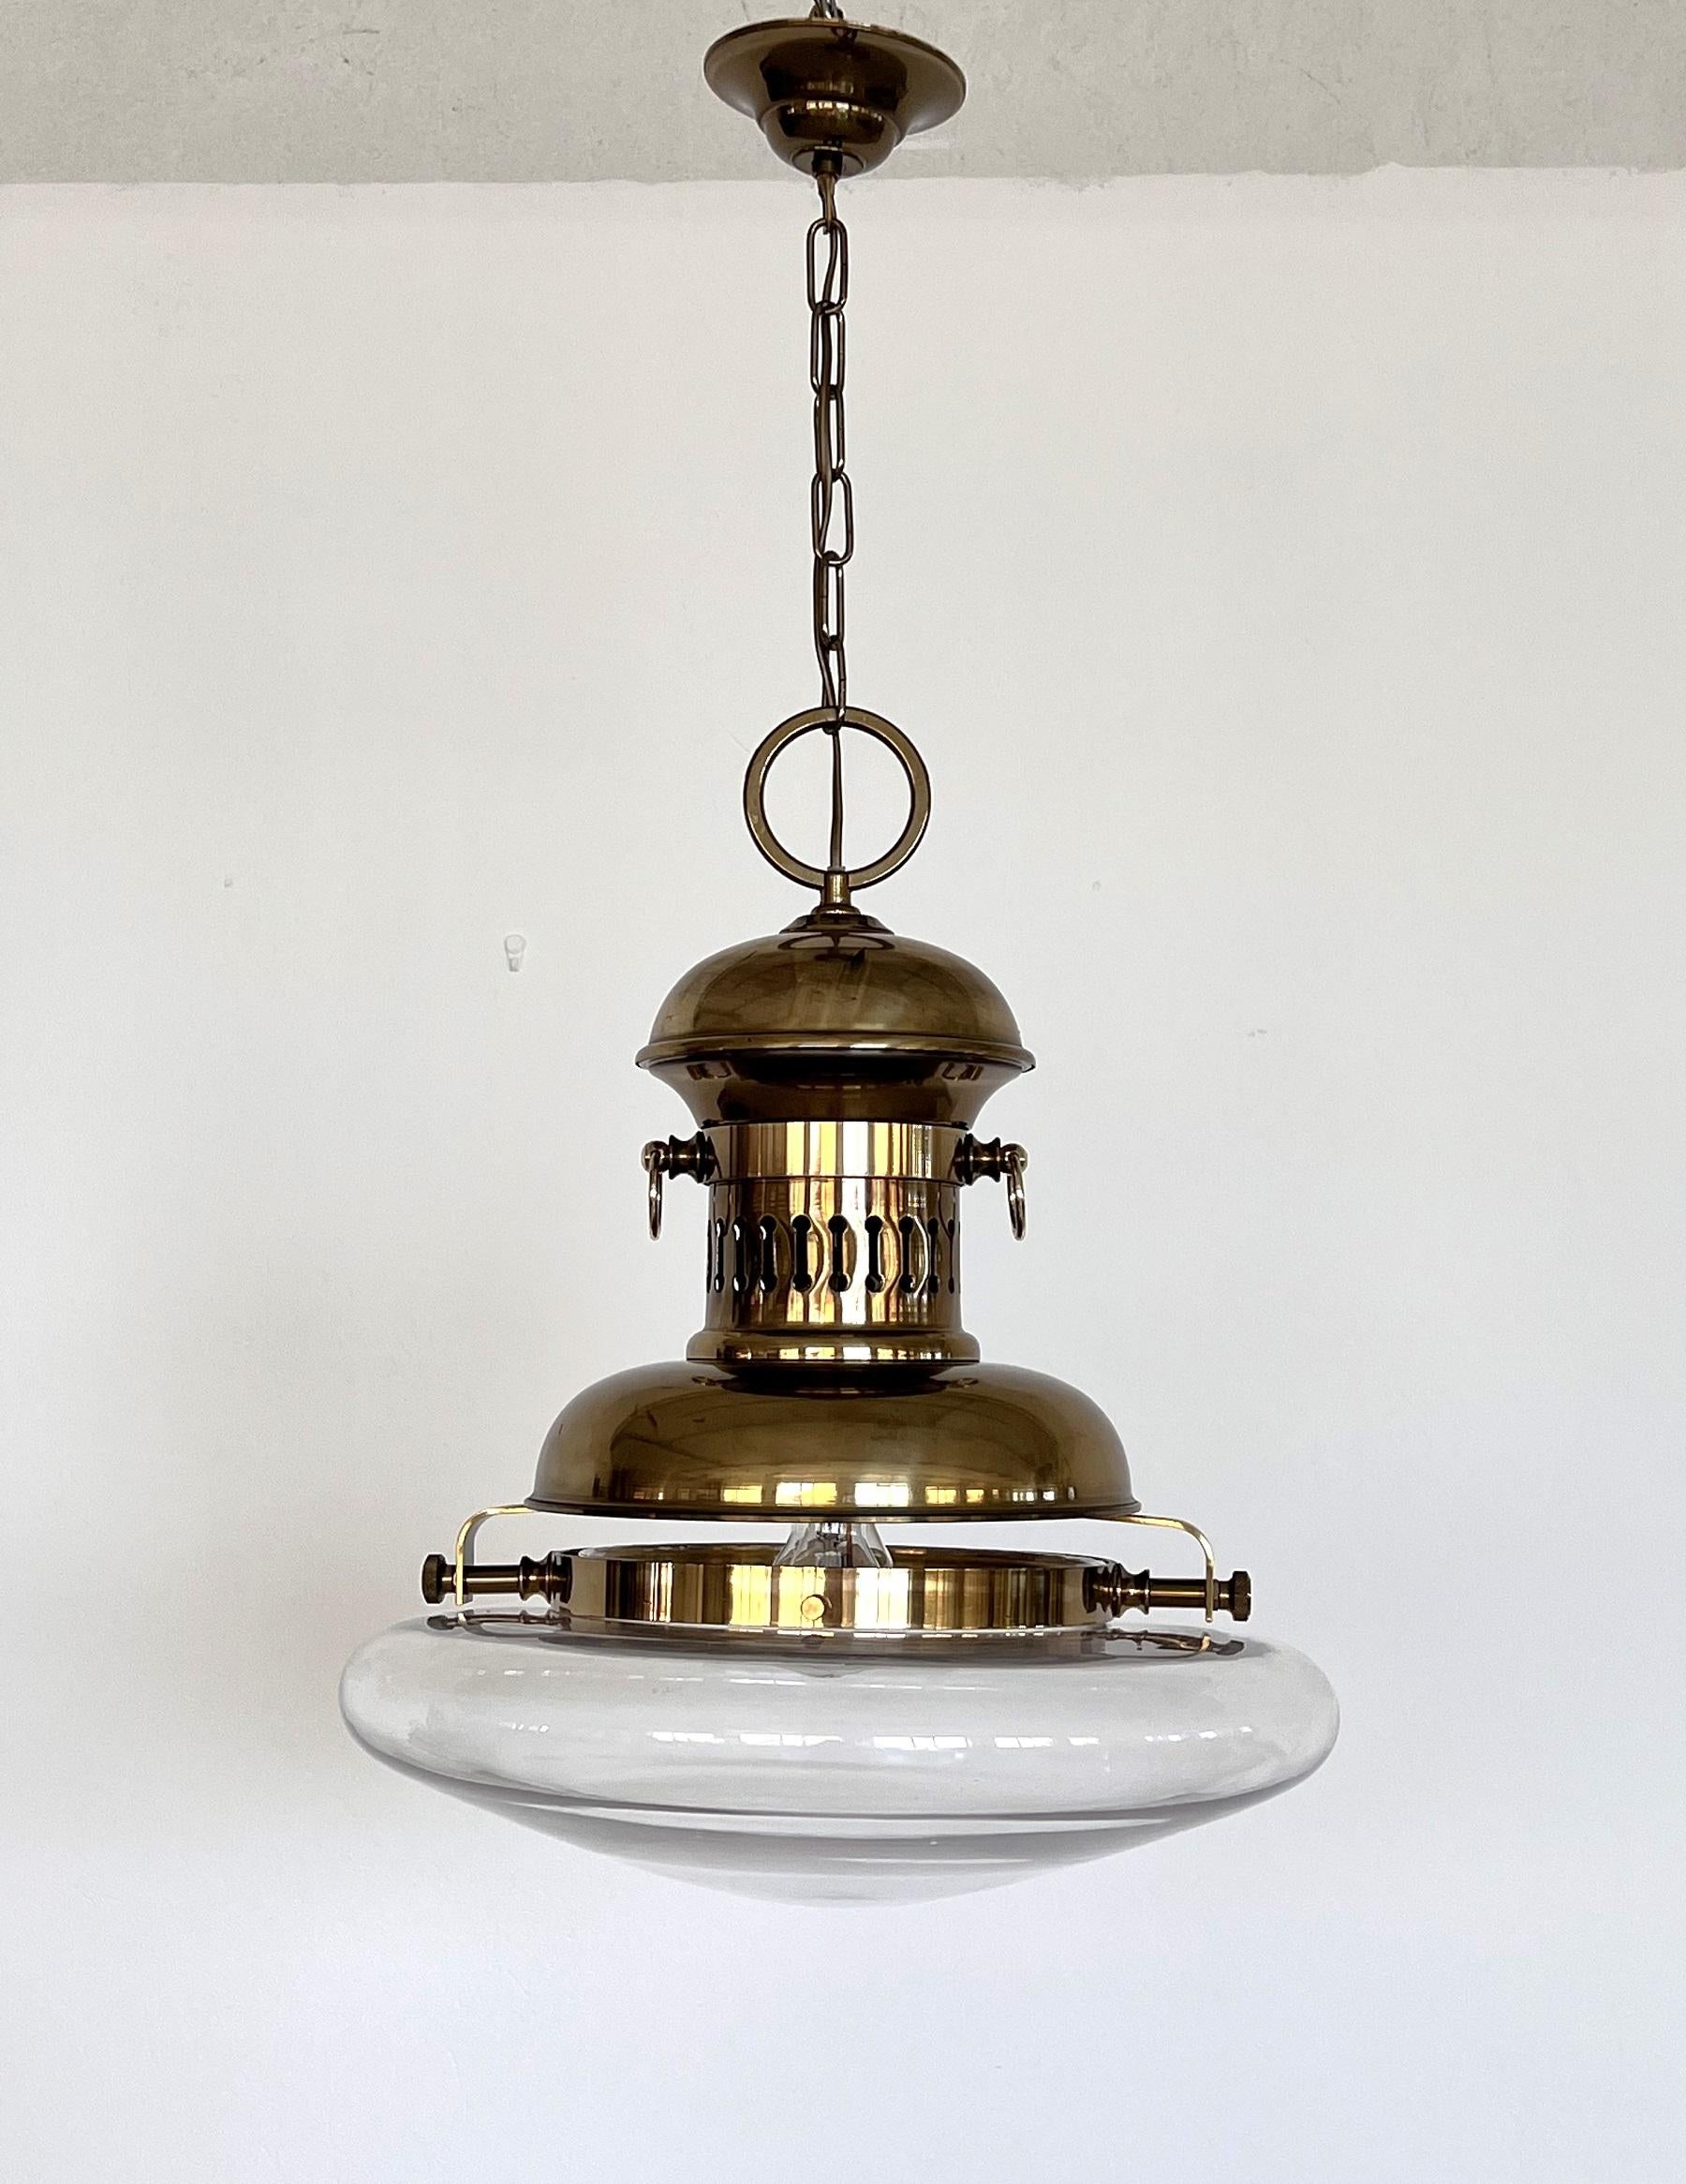 Gorgeous pendant lamp in nautical style made of full brass and glass.
Made in Italy in the 1970s approx.
The pendant lamp immediately gives the impression of being in a nautical environment.
It is in very good vintage condition with great dark